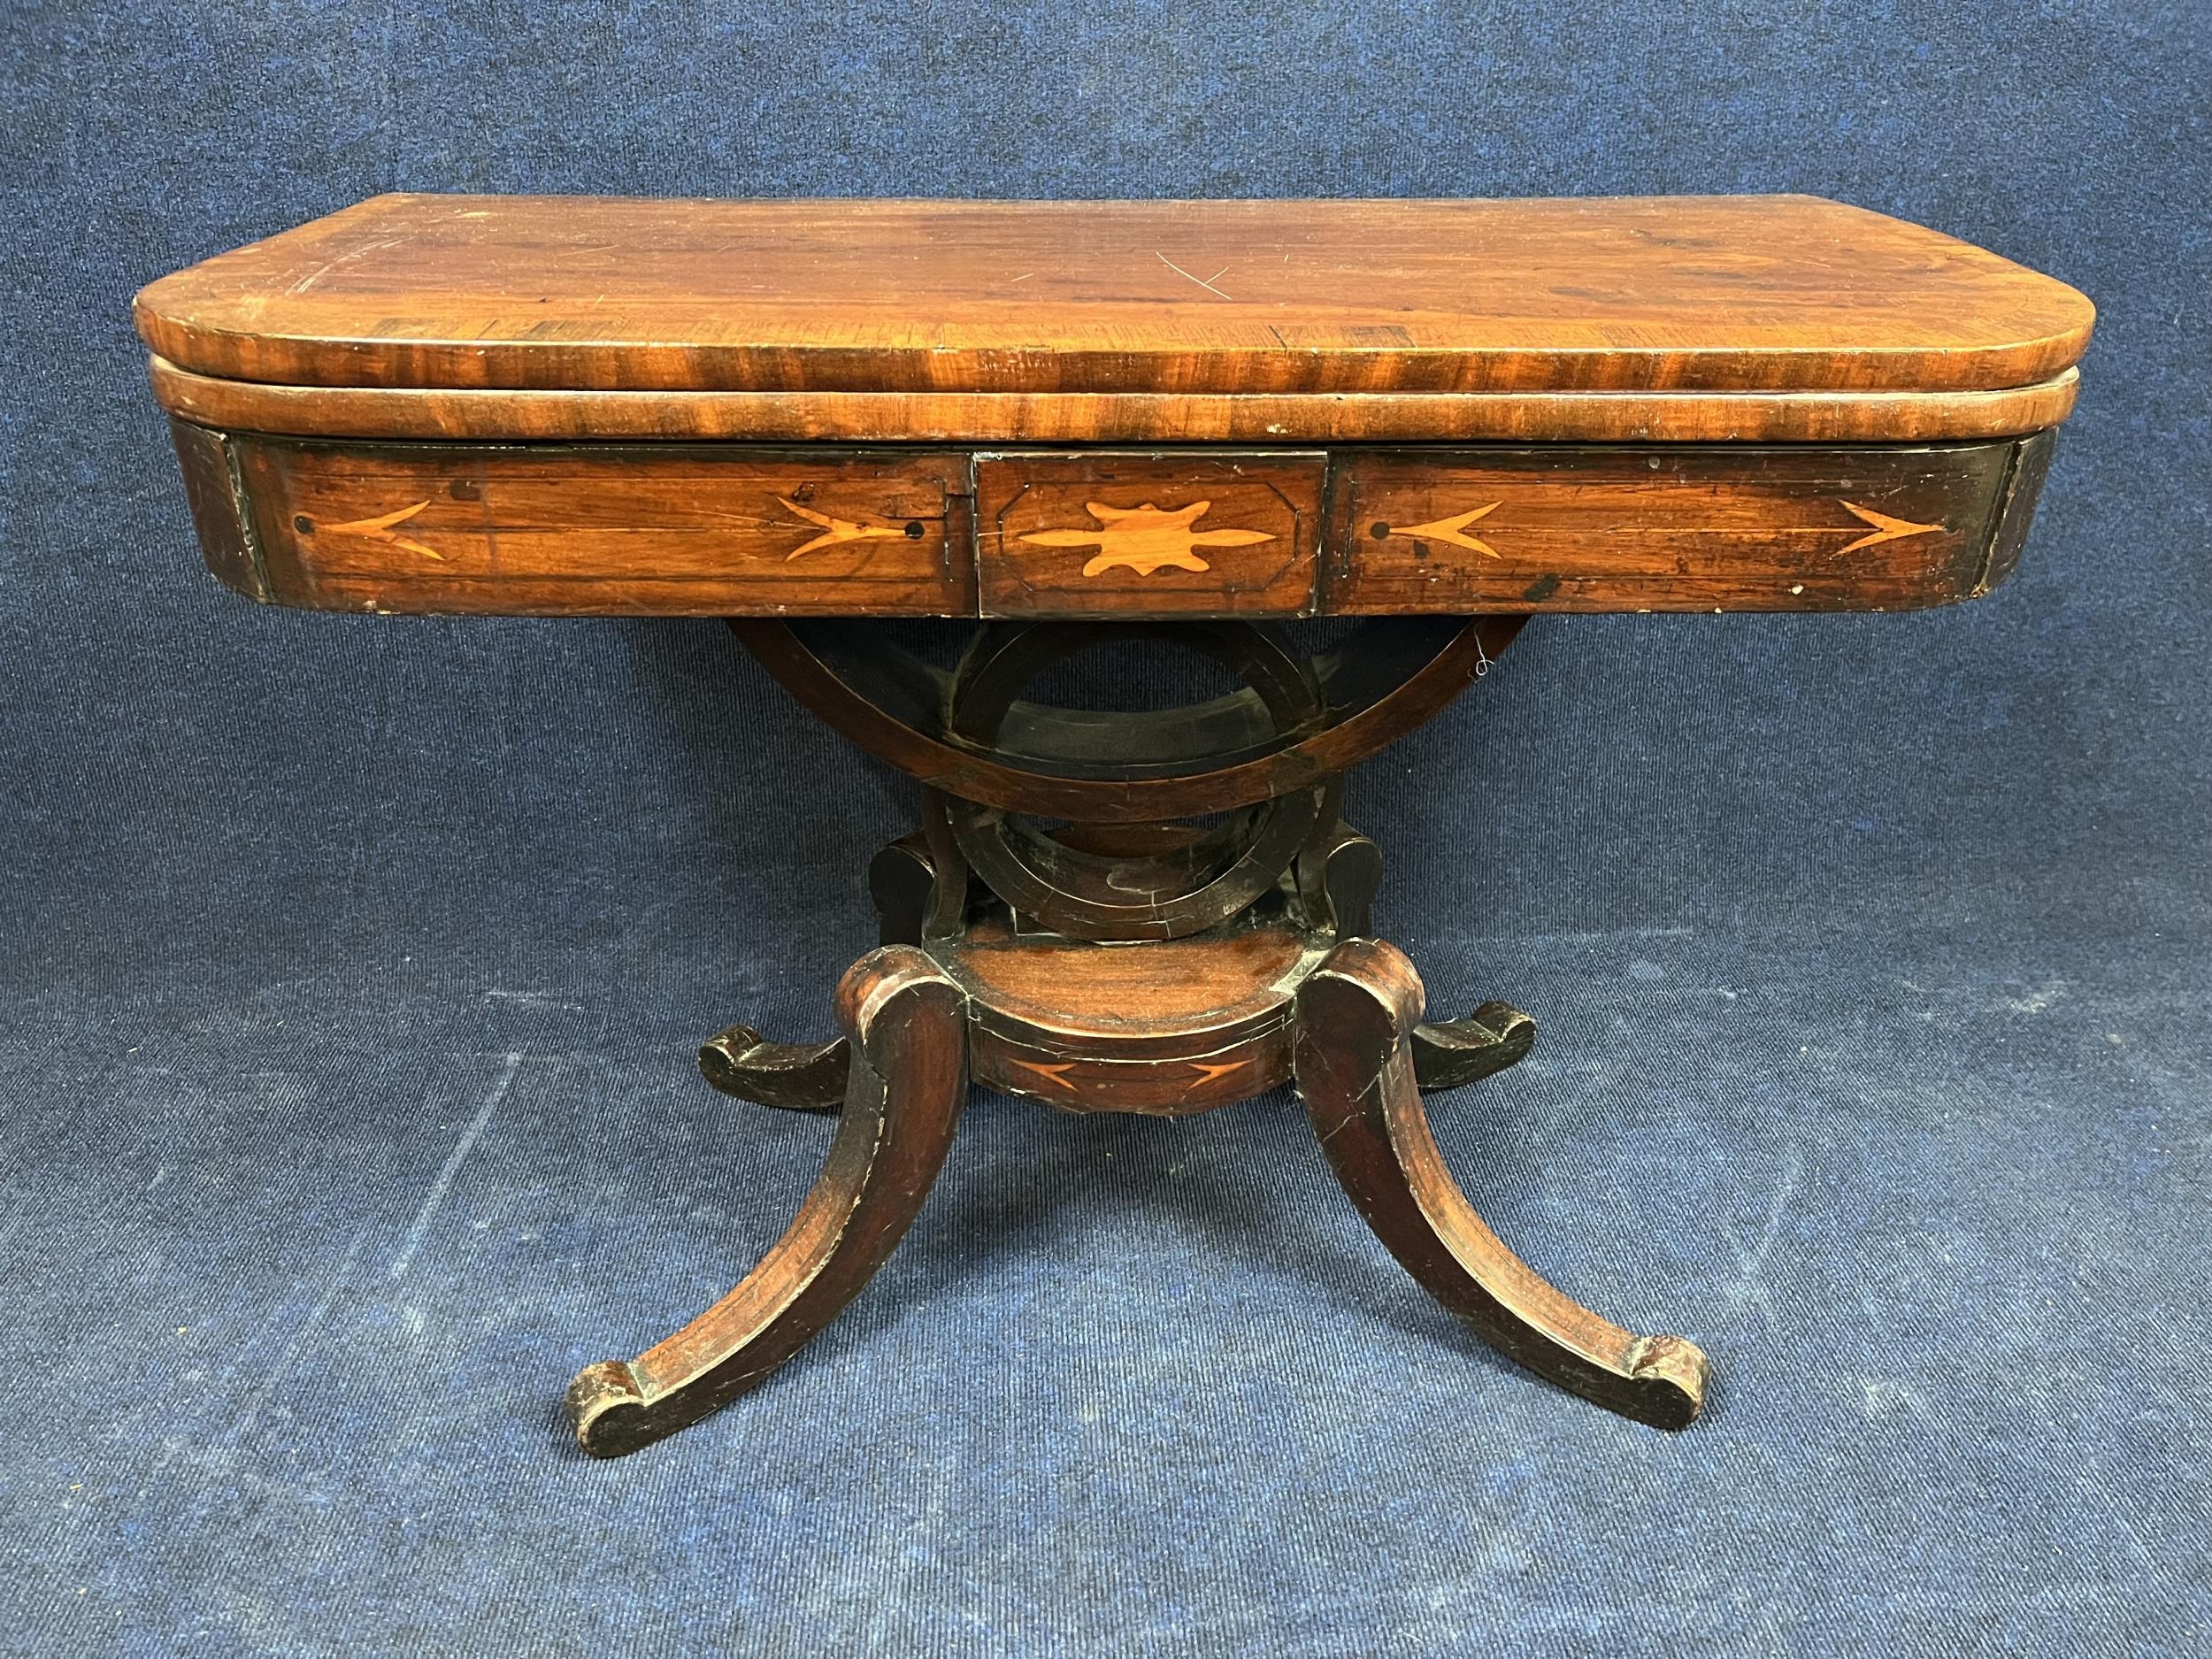 A Regency mahogany and rosewood crossbanded card table. H.66 W.45 open top W.91